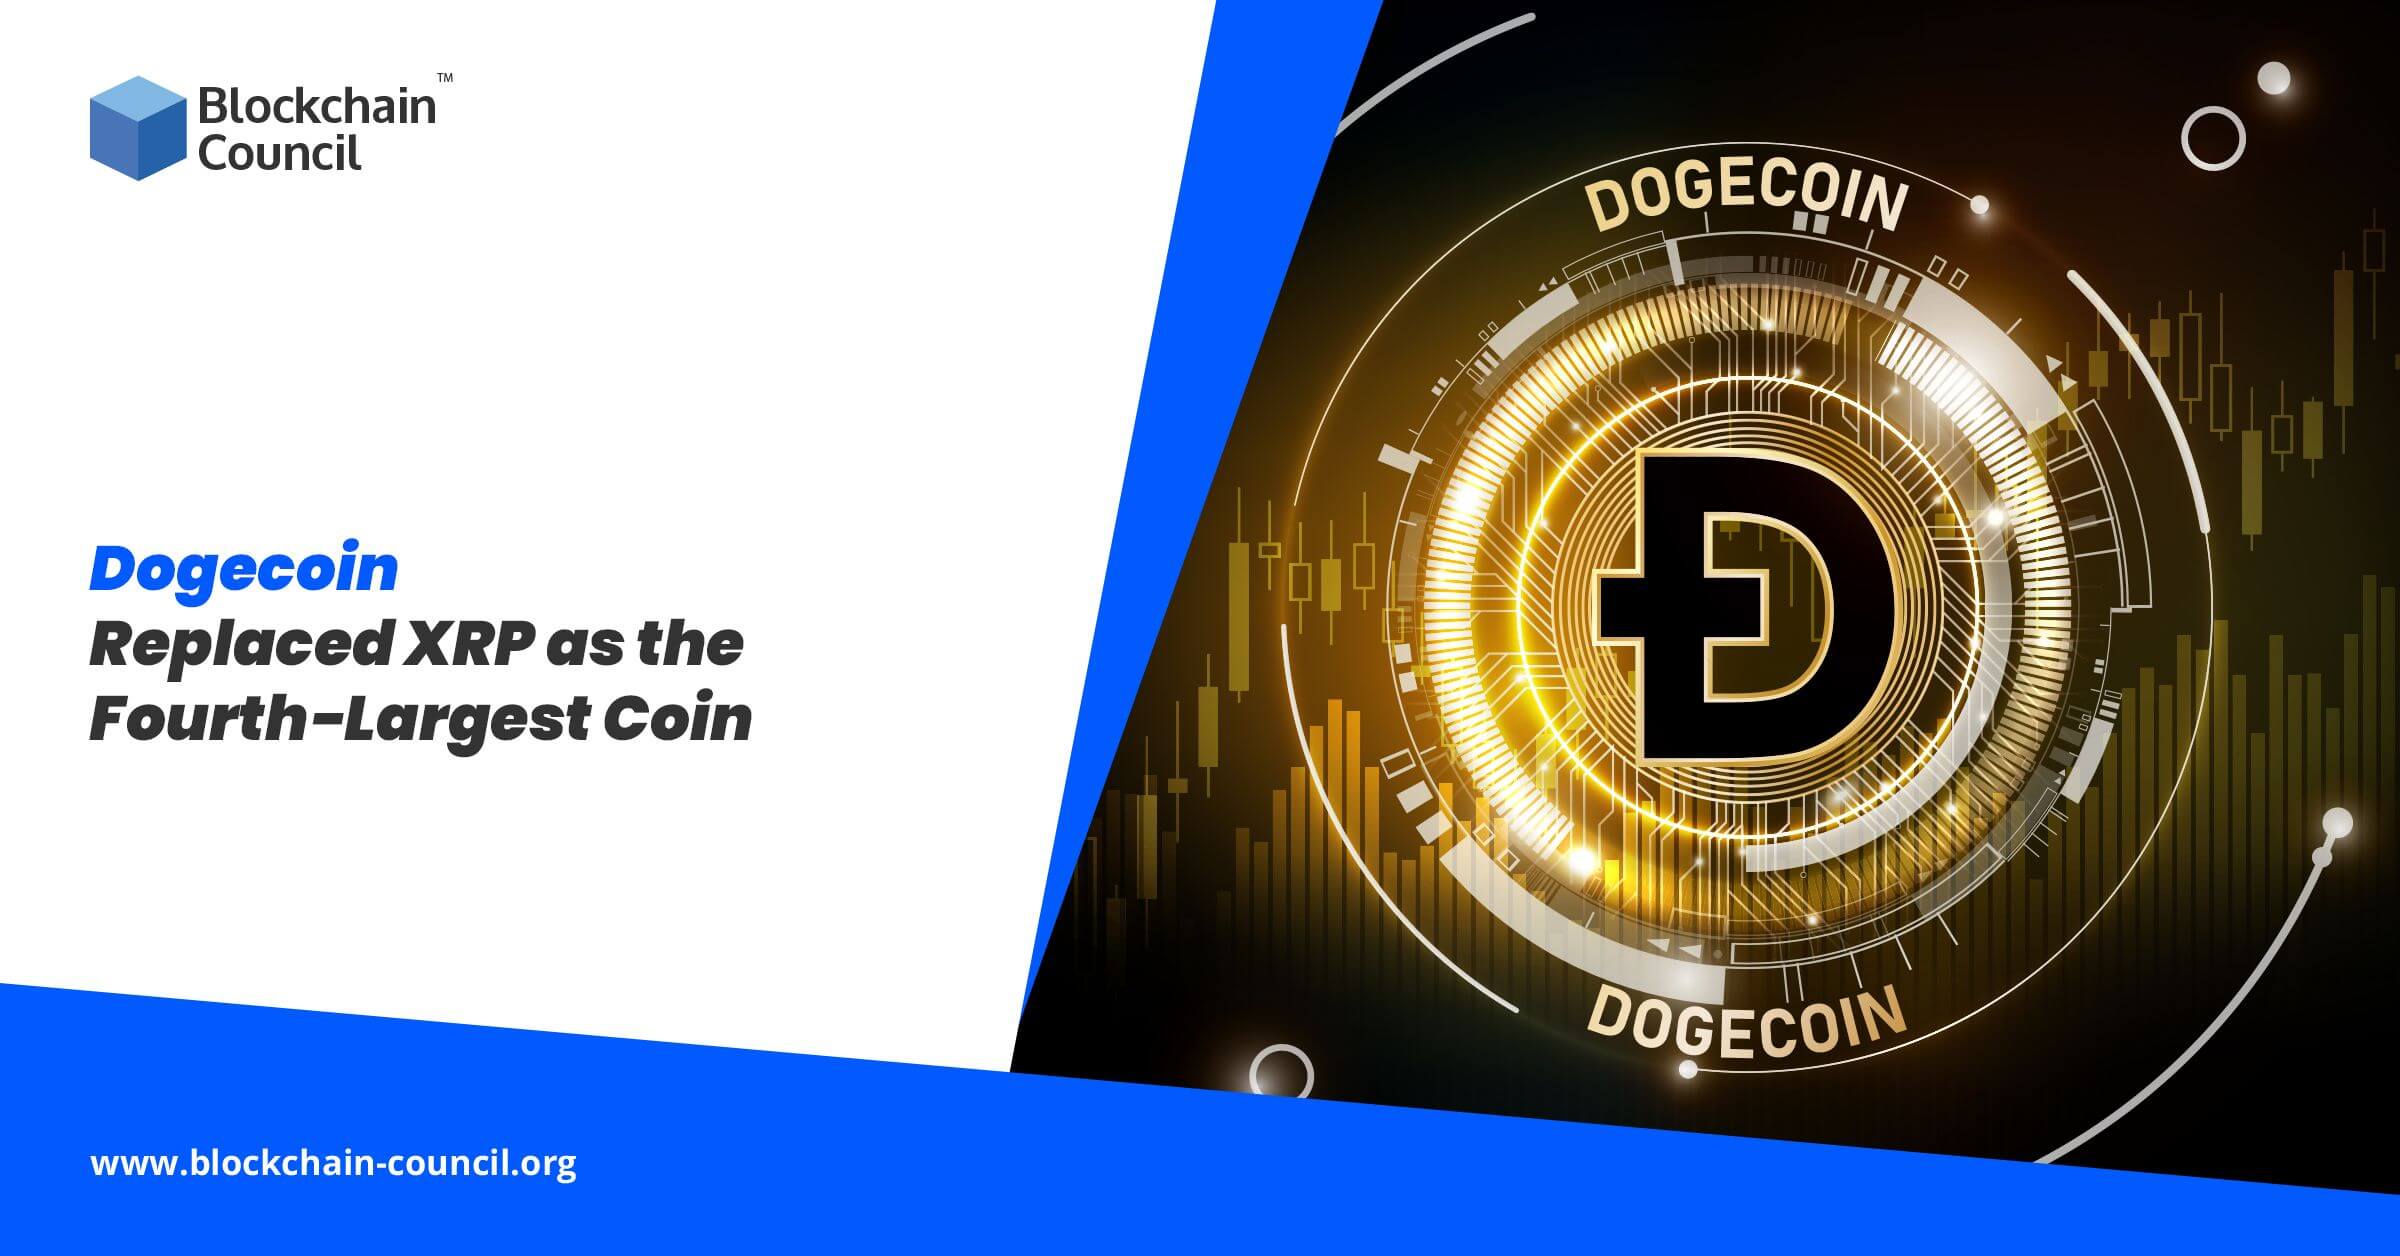 Dogecoin Replaced XRP as the Fourth-Largest Coin